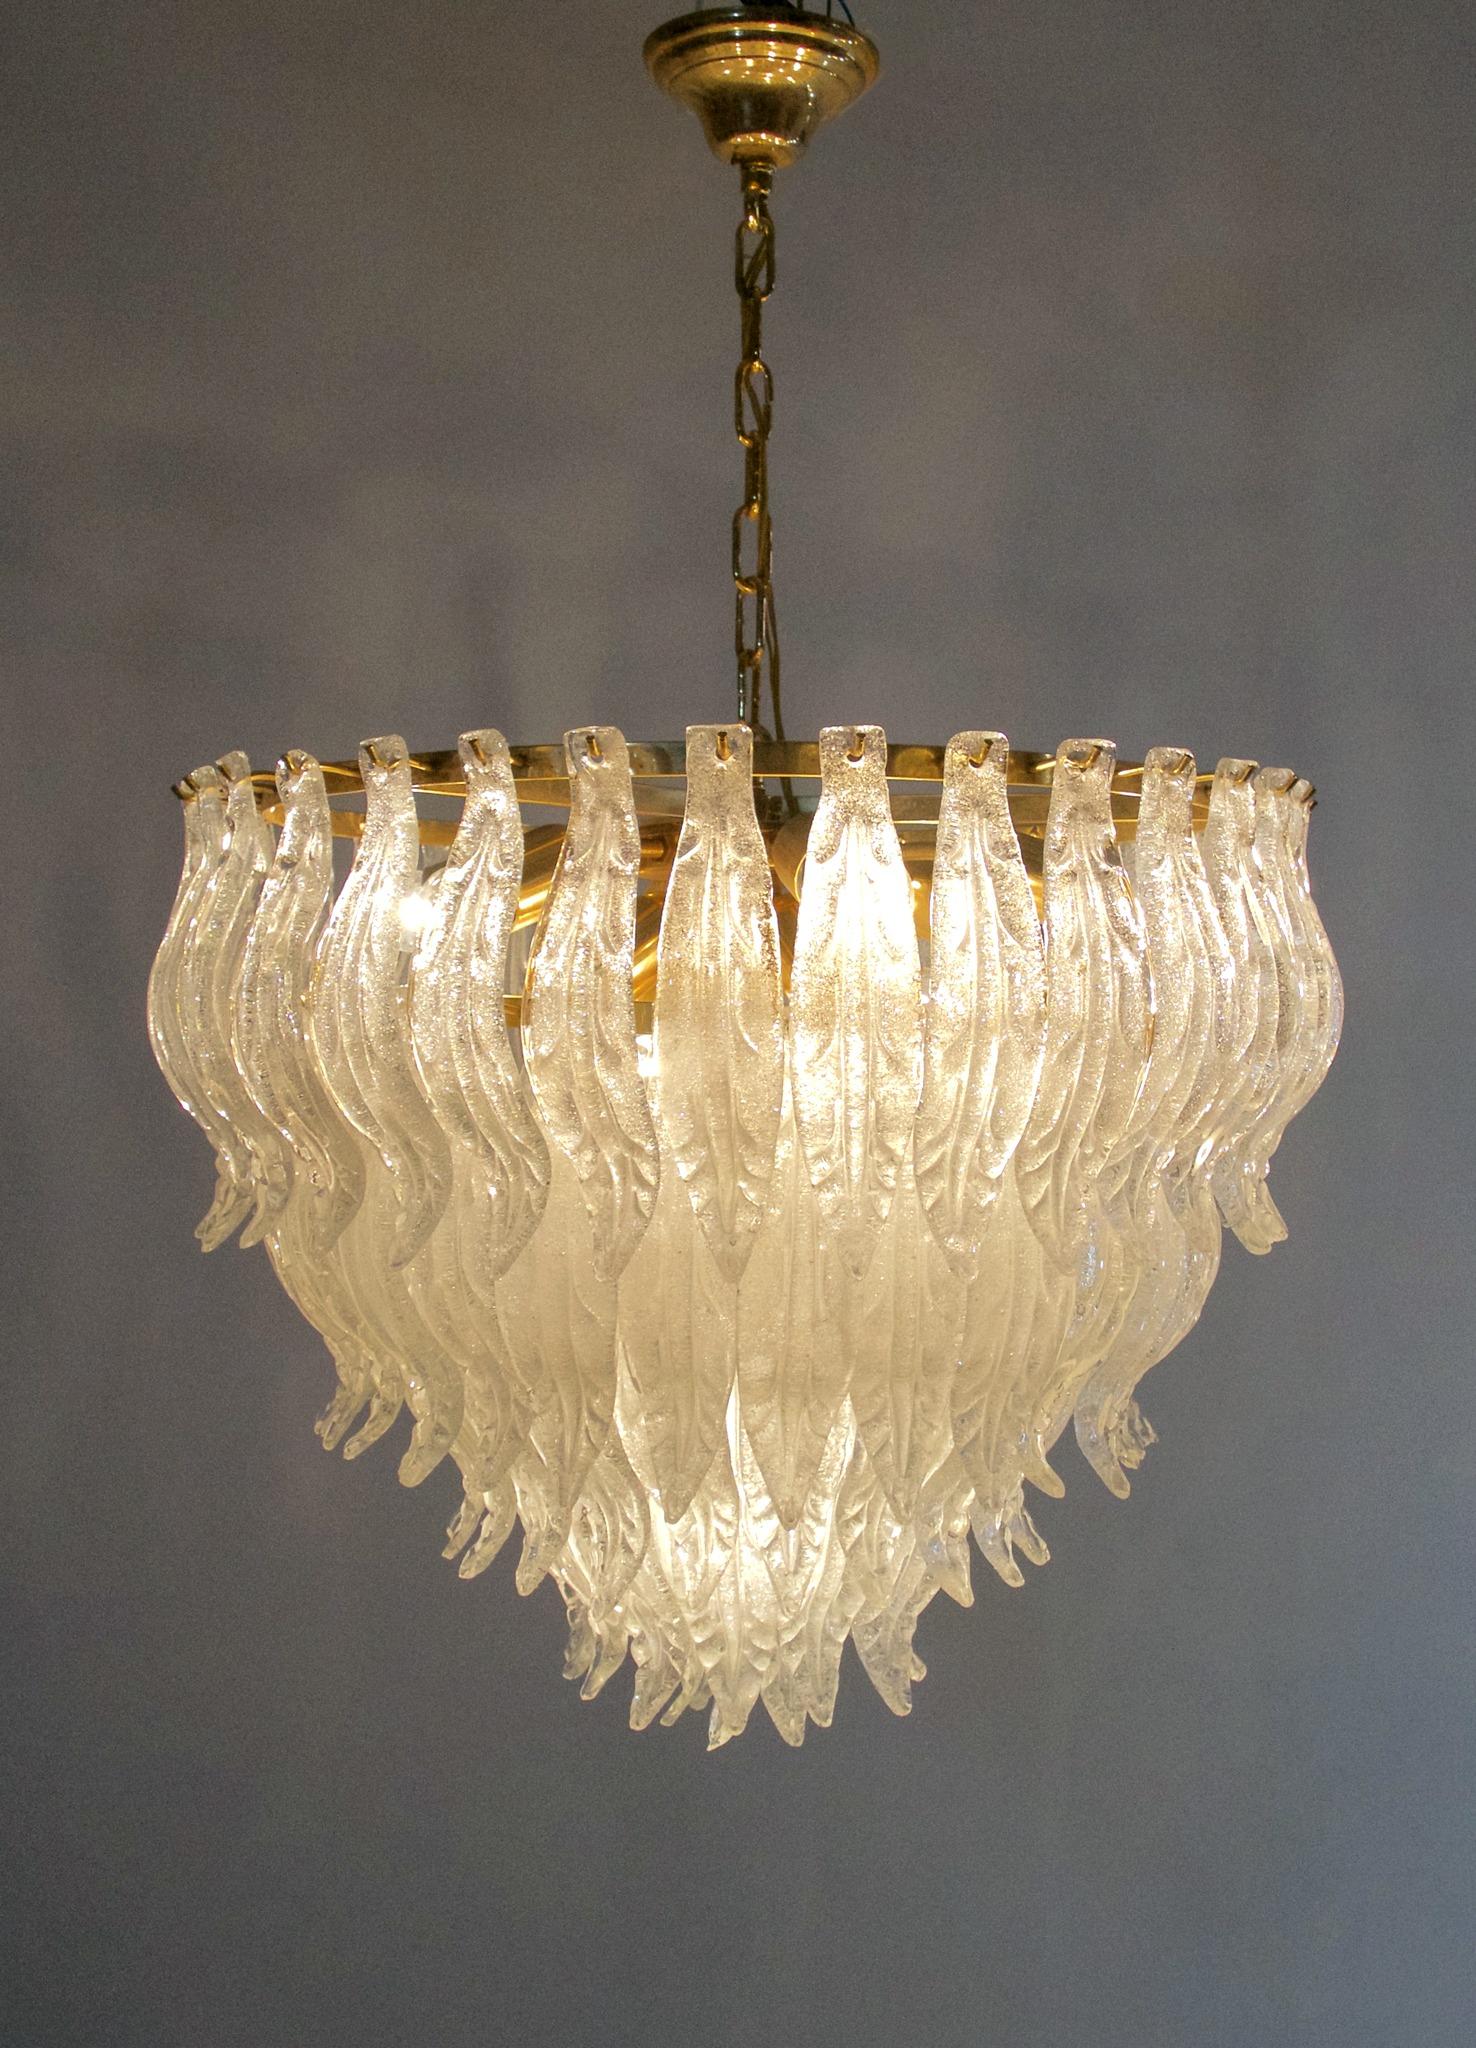 Magnificent large Murano Italian glass leaf chandelier with clear/frosted hand blown glass leaves suspended on a gold frame. Wiring works for the US as well as Europe and uses 11(eleven) E14 bulbs. There are 101 glass leaves that really sparkle when